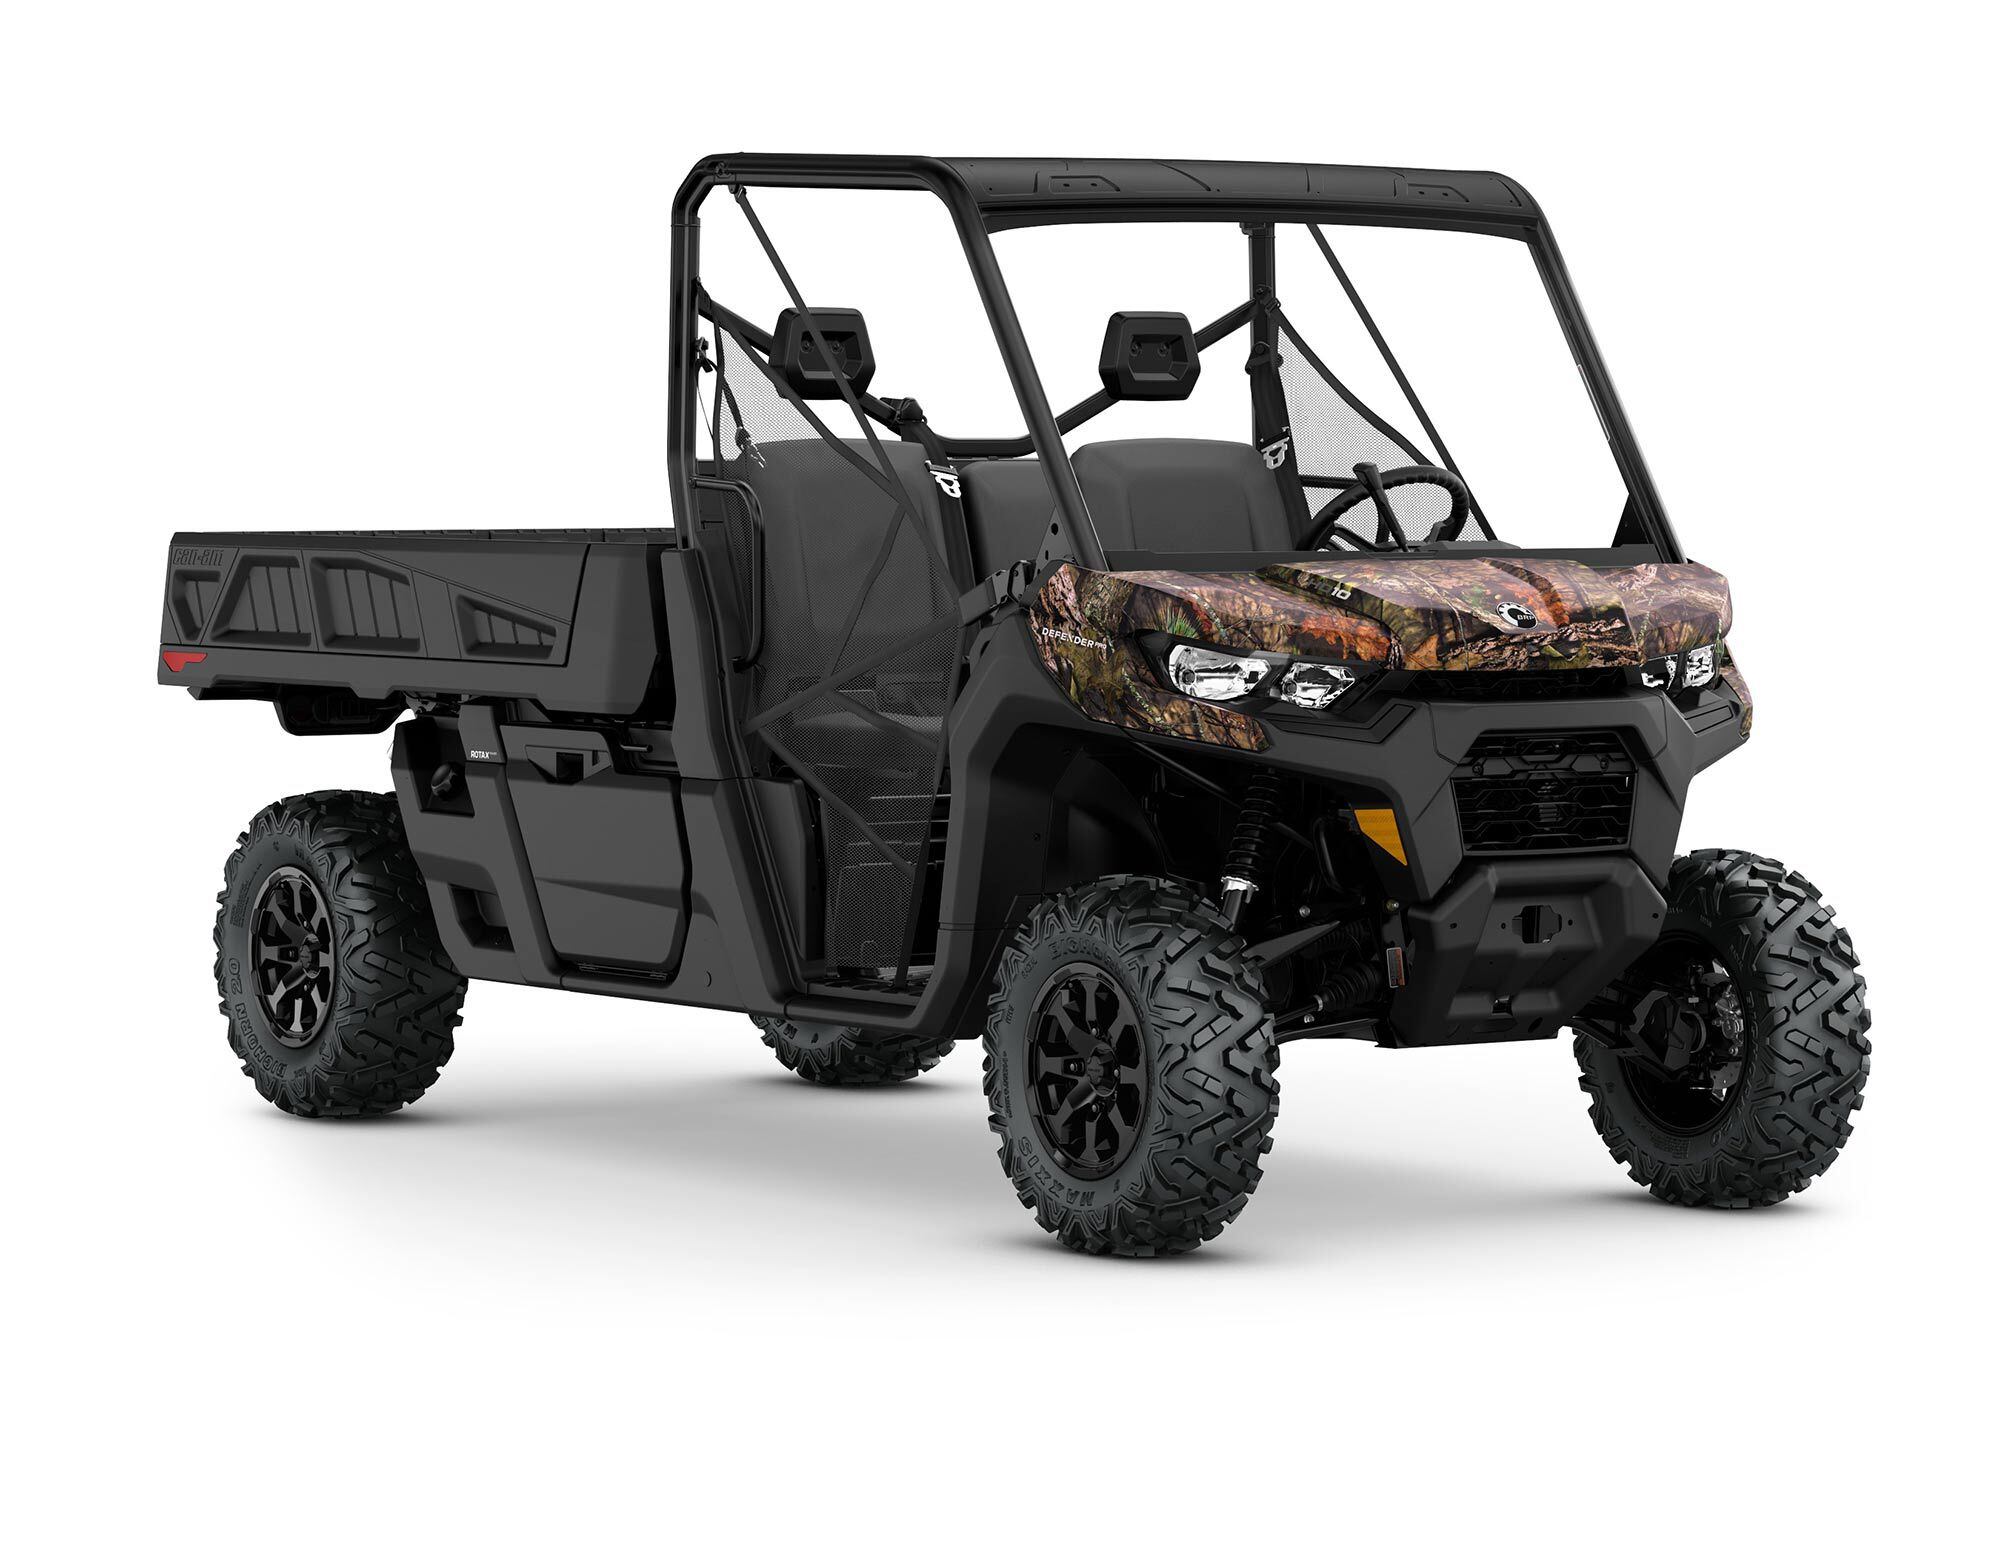 2022 Can-Am Defender Pro DPS front view in Mossy Oak Break-Up Country Camo.